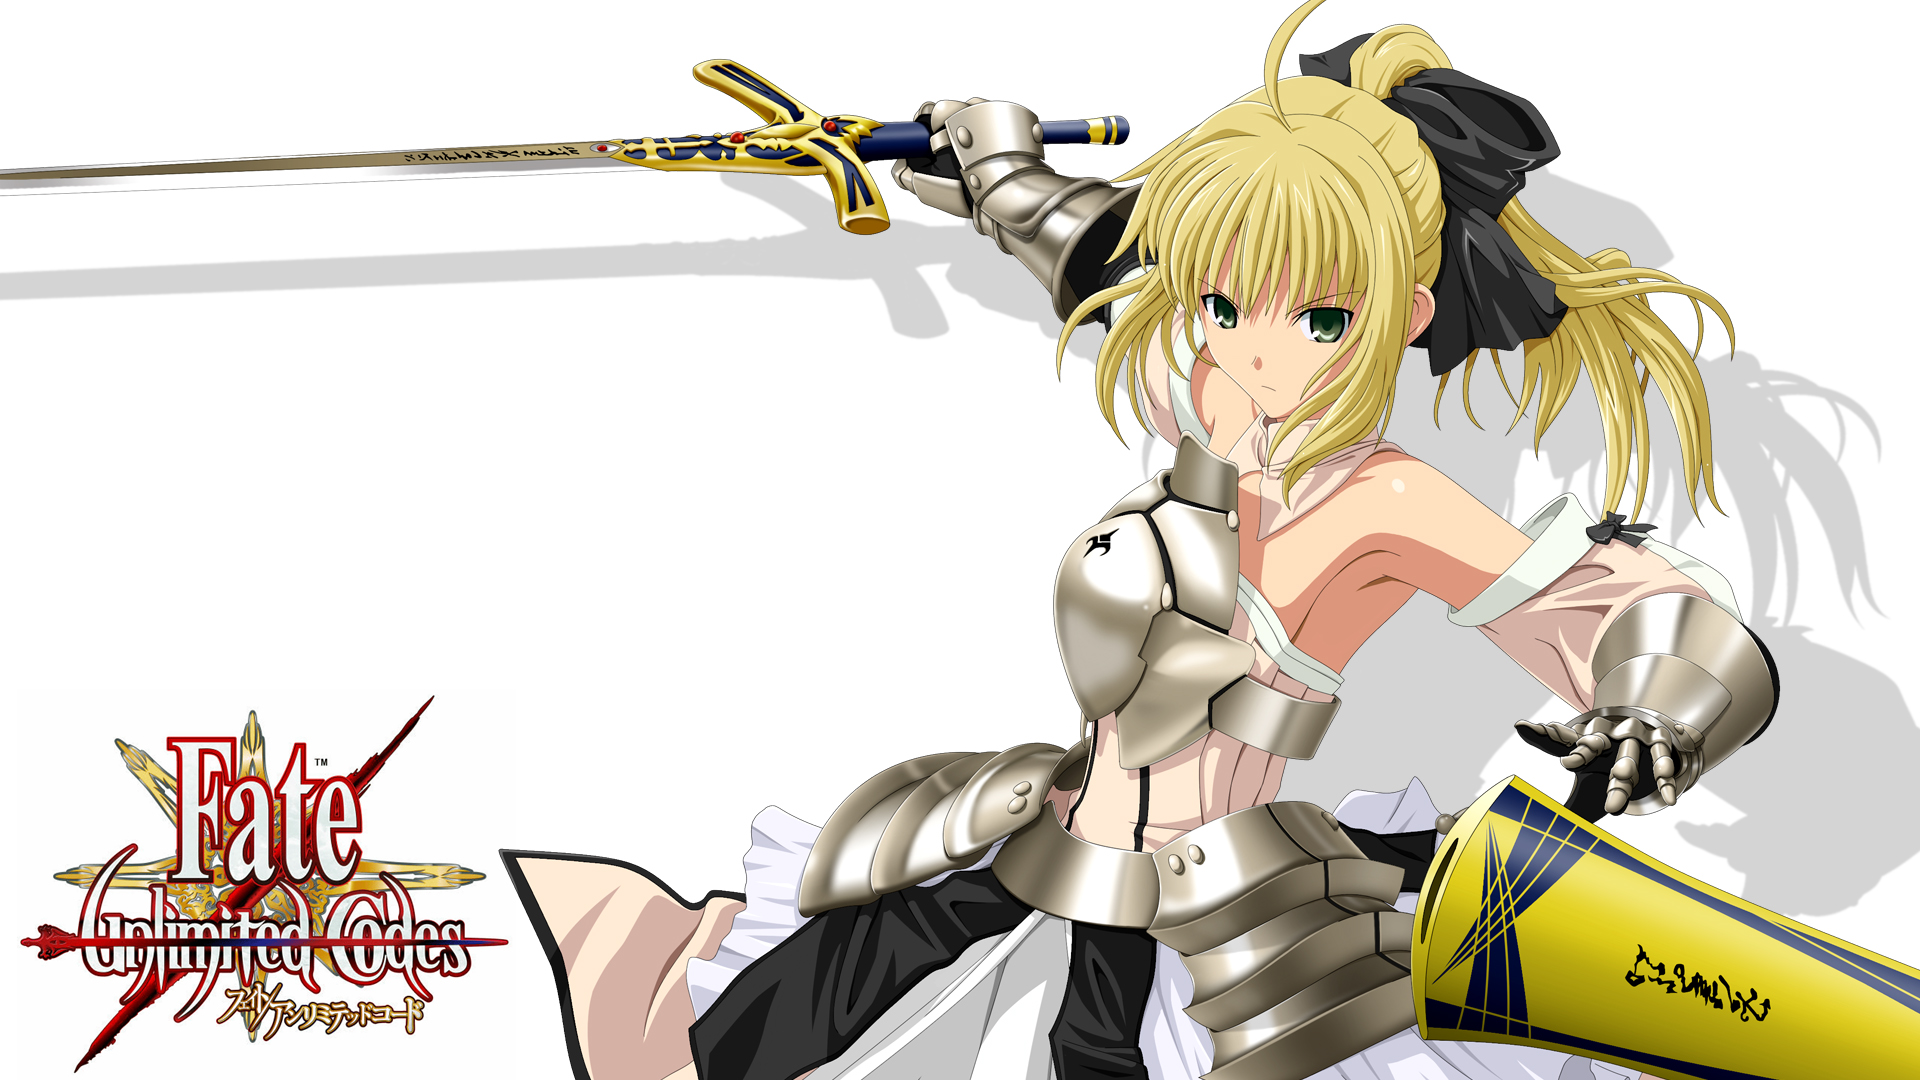 Saber Lily from Fate/unlimited codes in a vibrant anime desktop wallpaper.